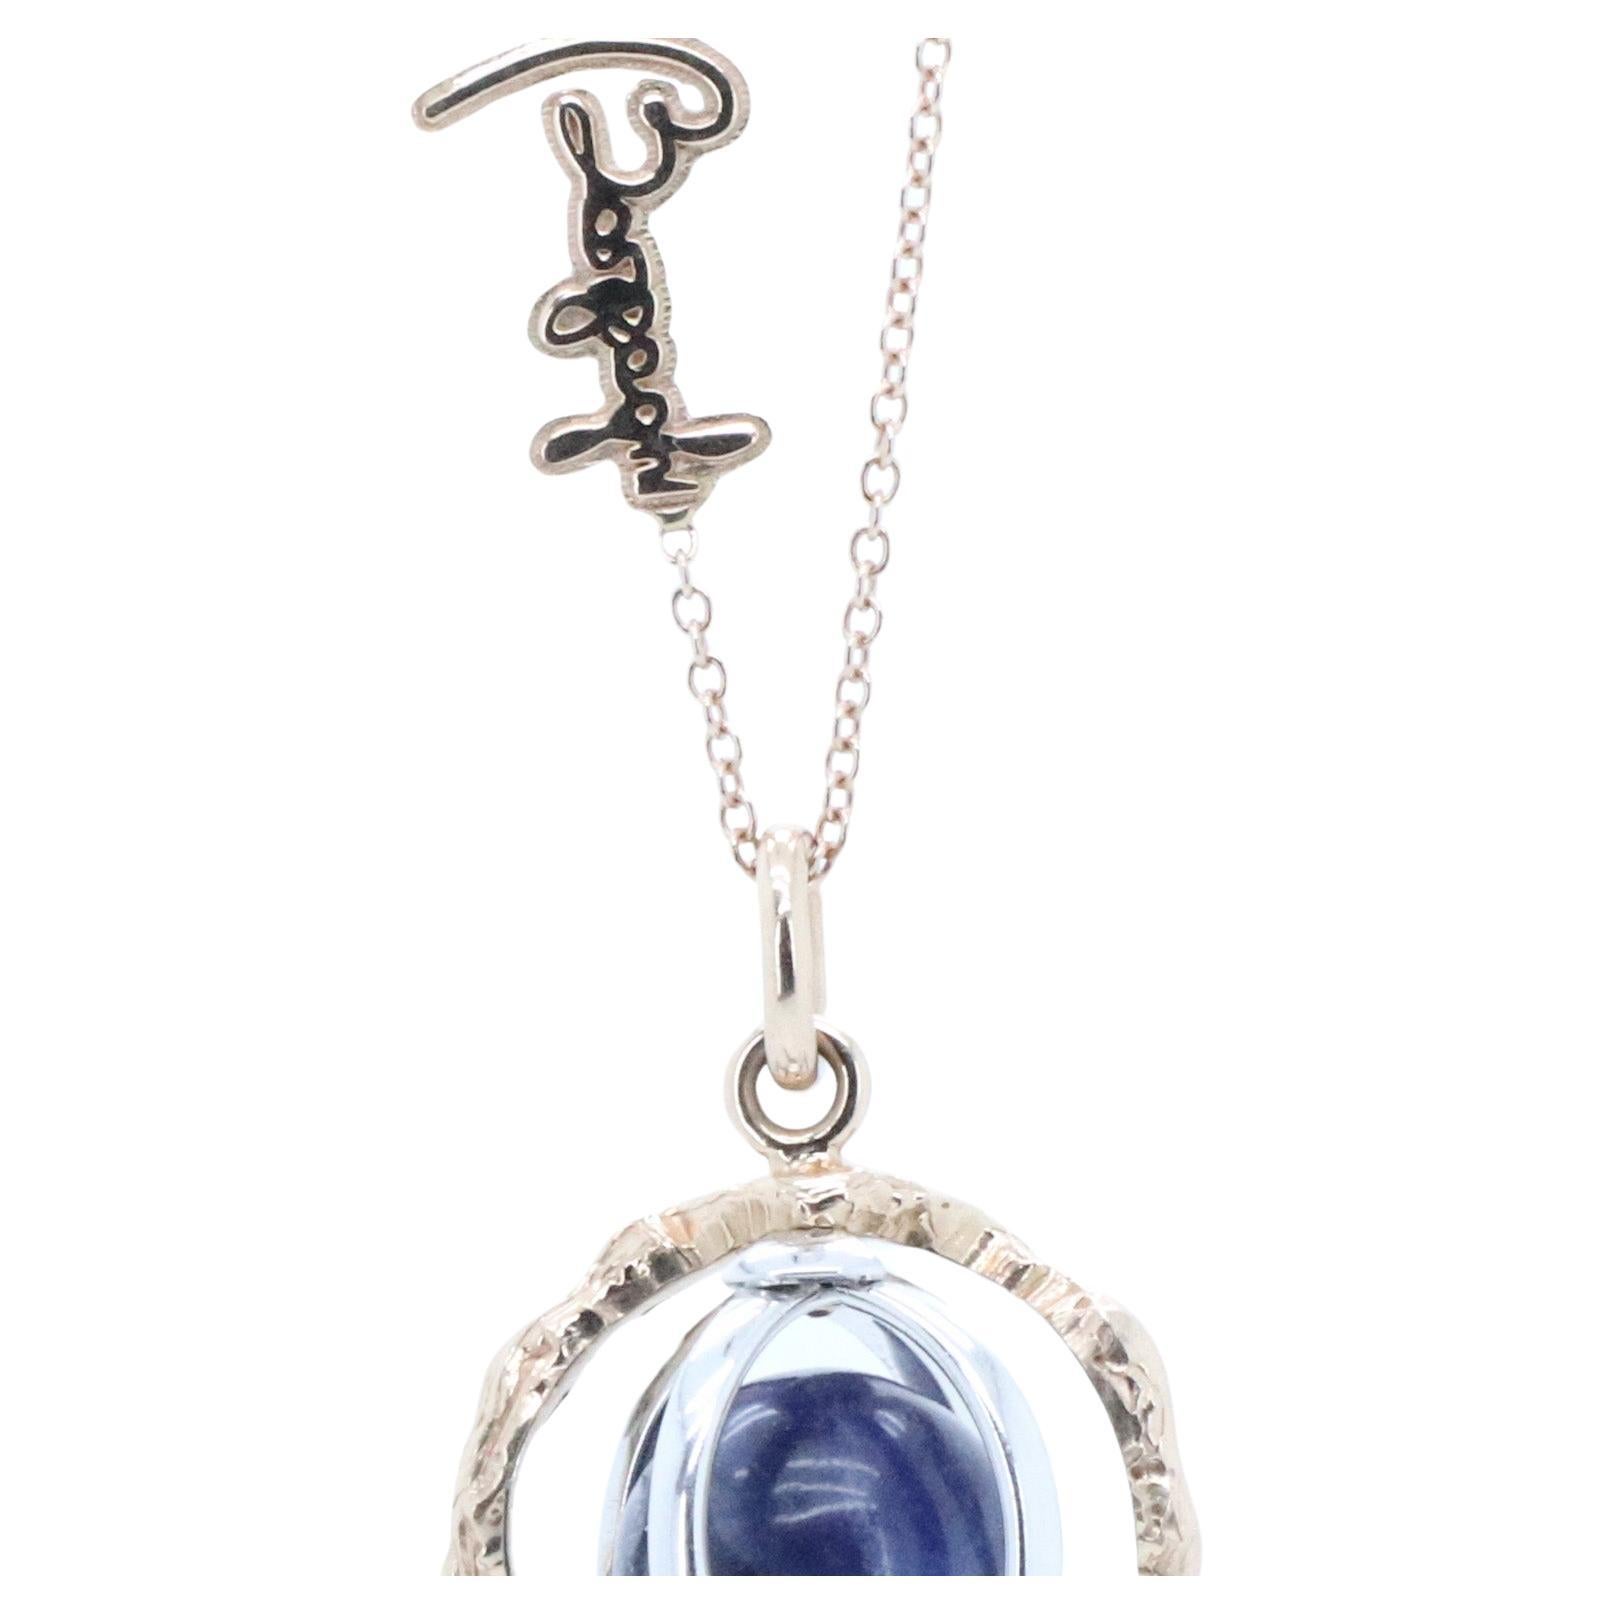 18k Gold Made in Italy Sodalite Changeable Gem Revolving Loops Essence Necklace.
Experience the Wellbeing of Sound and Gemstones with the Sonoro Pendant Necklace.
Unlock Your Divine Potential with the Sonoro pendant. 
Gems and metal are